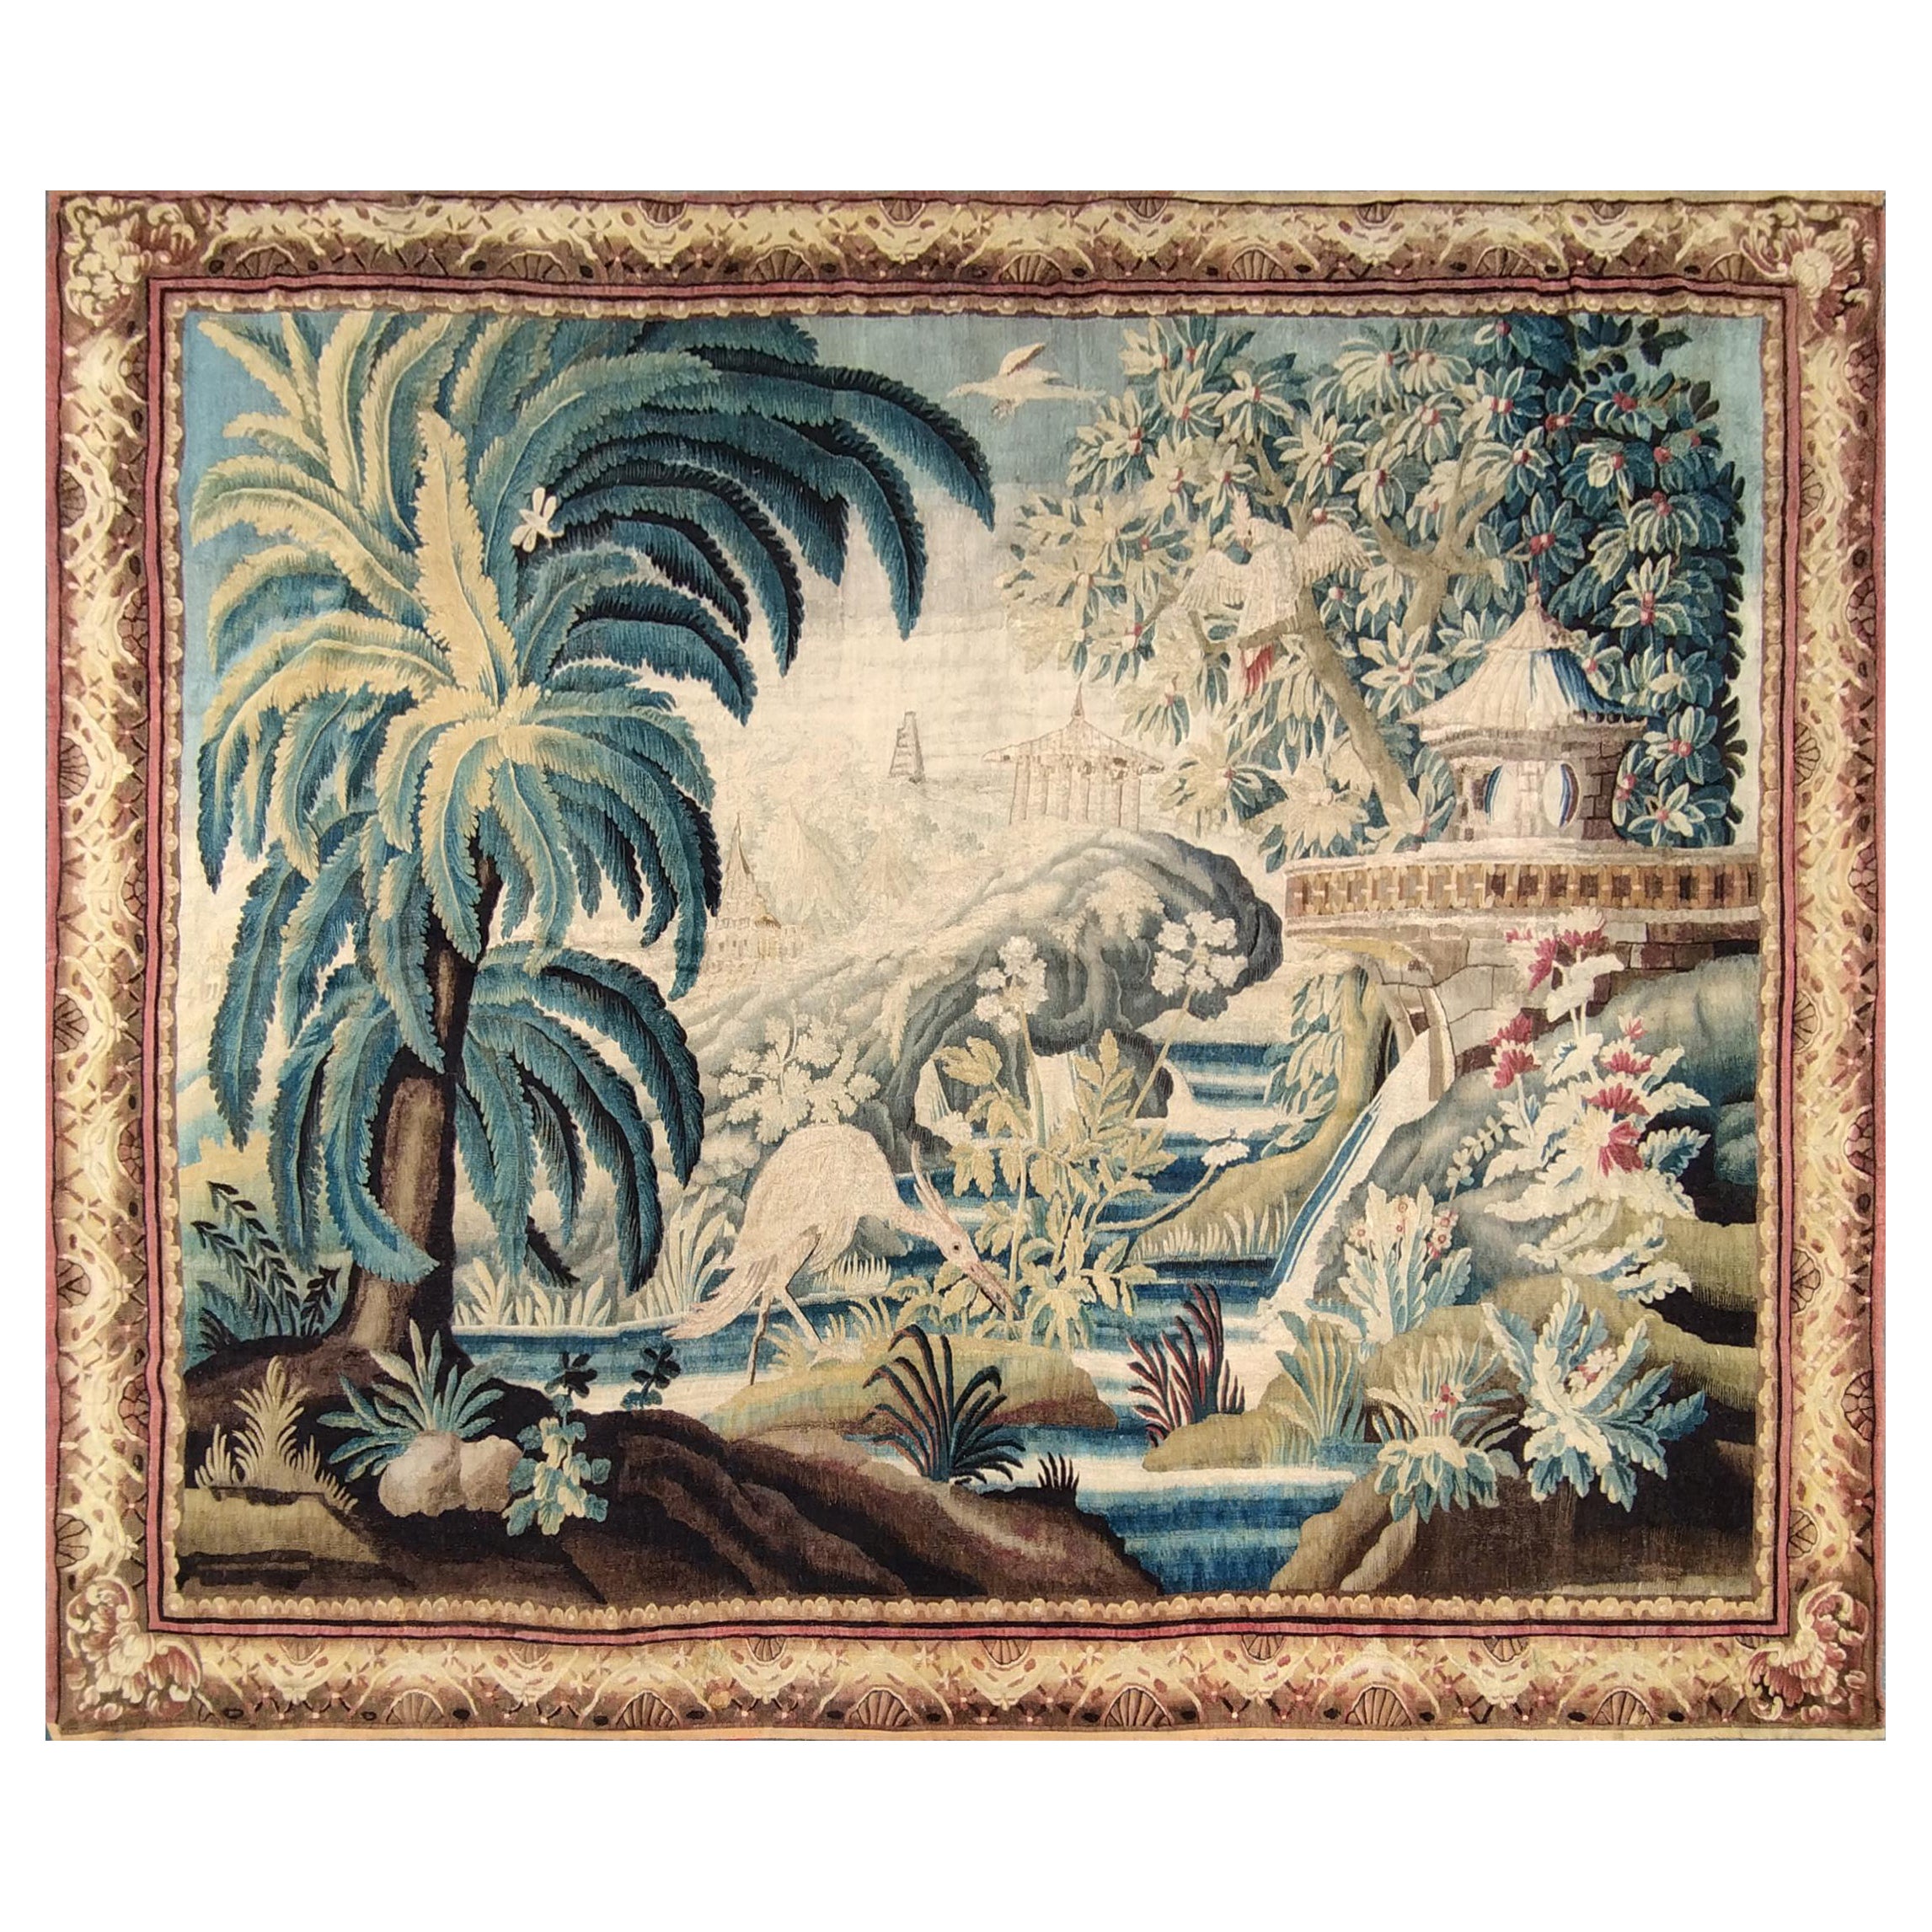 18th century Aubusson tapestry - N°1235